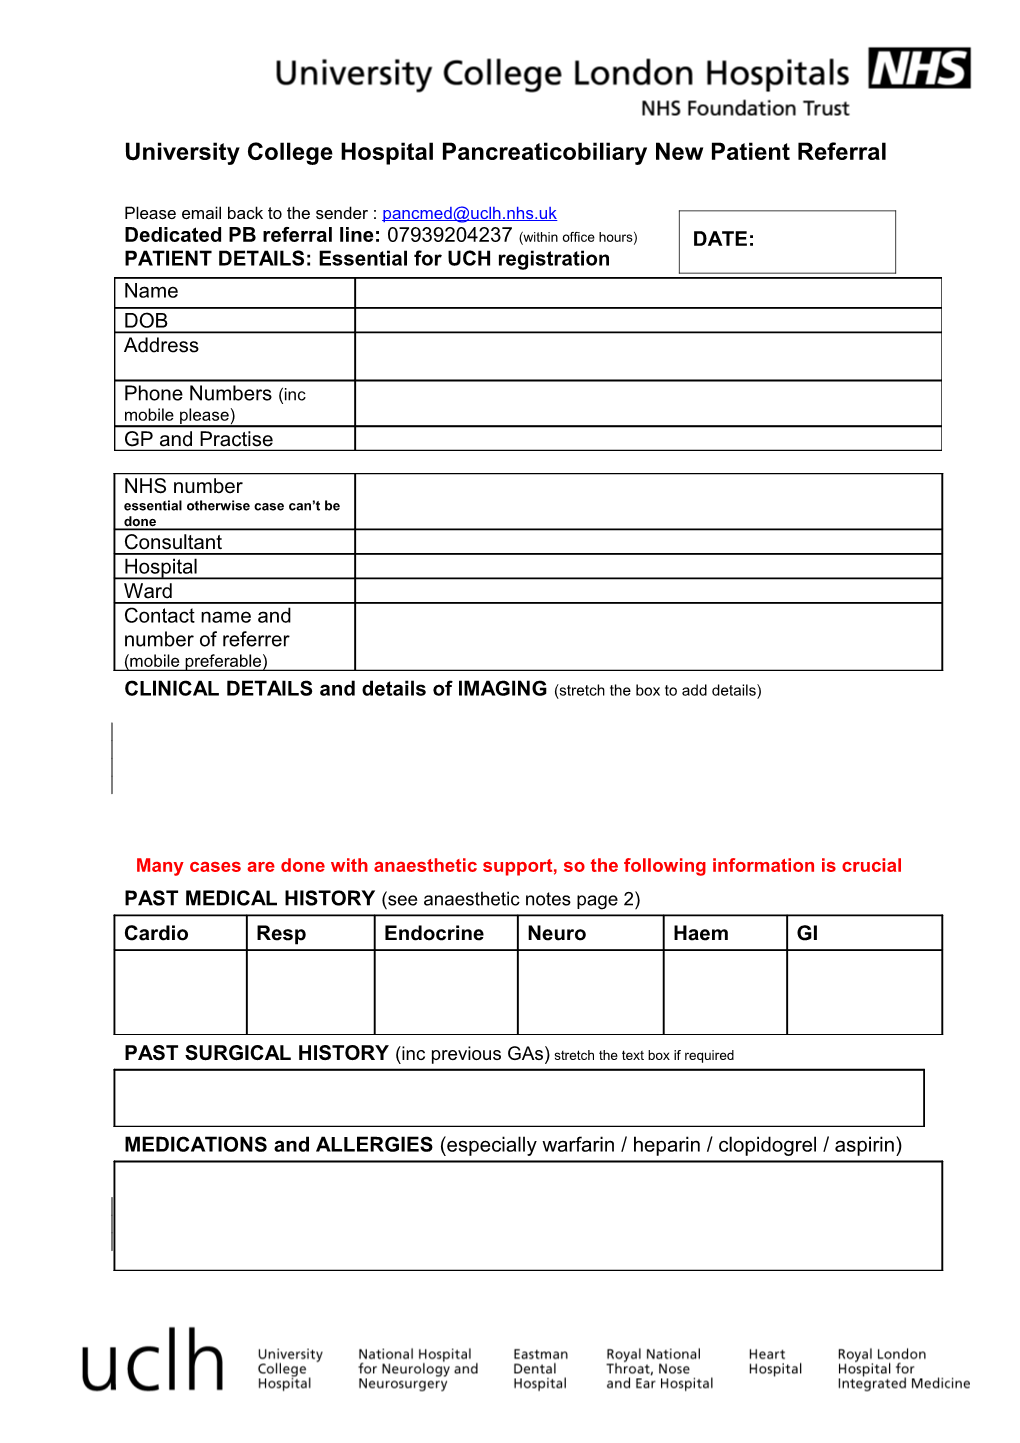 UCH Pancreatobiliary New Patient Referral Form